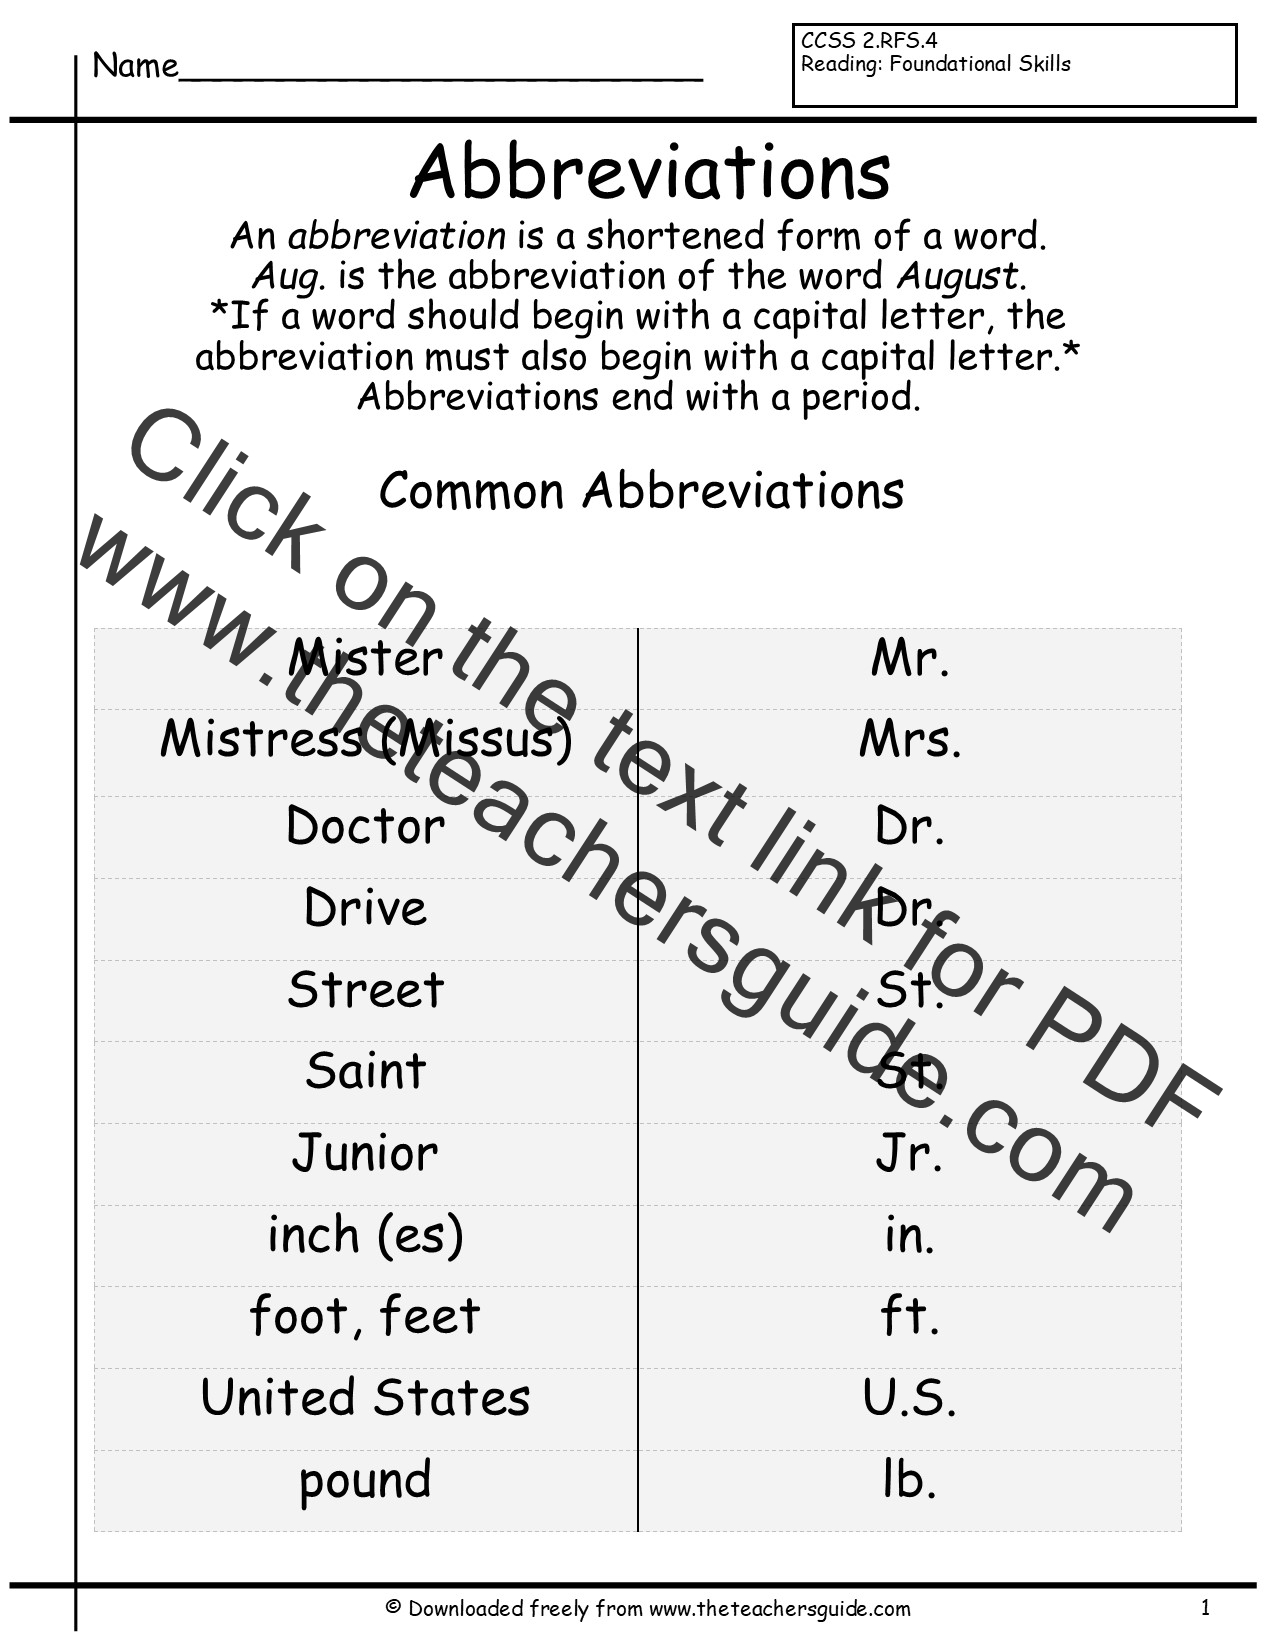 Abbreviations Worksheets from The Teacher's Guide